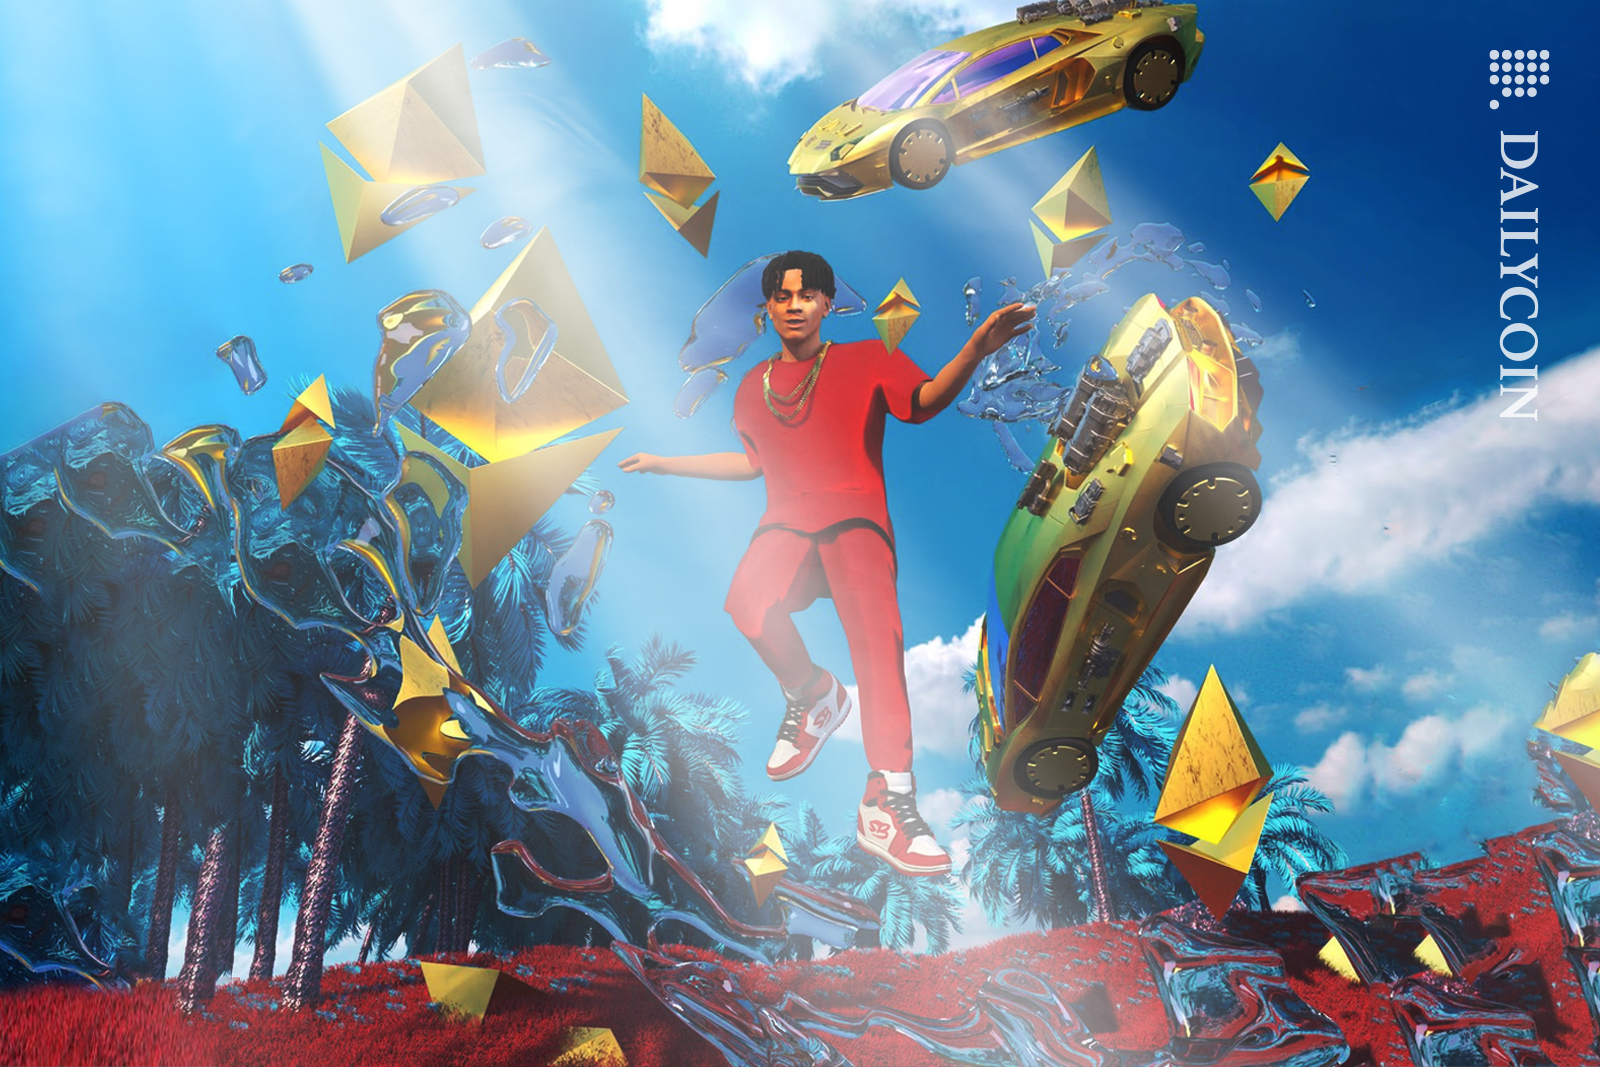 Soulja Boy surrounded by submerged golden Ethereum logo and floating sports cars 3D NFT.